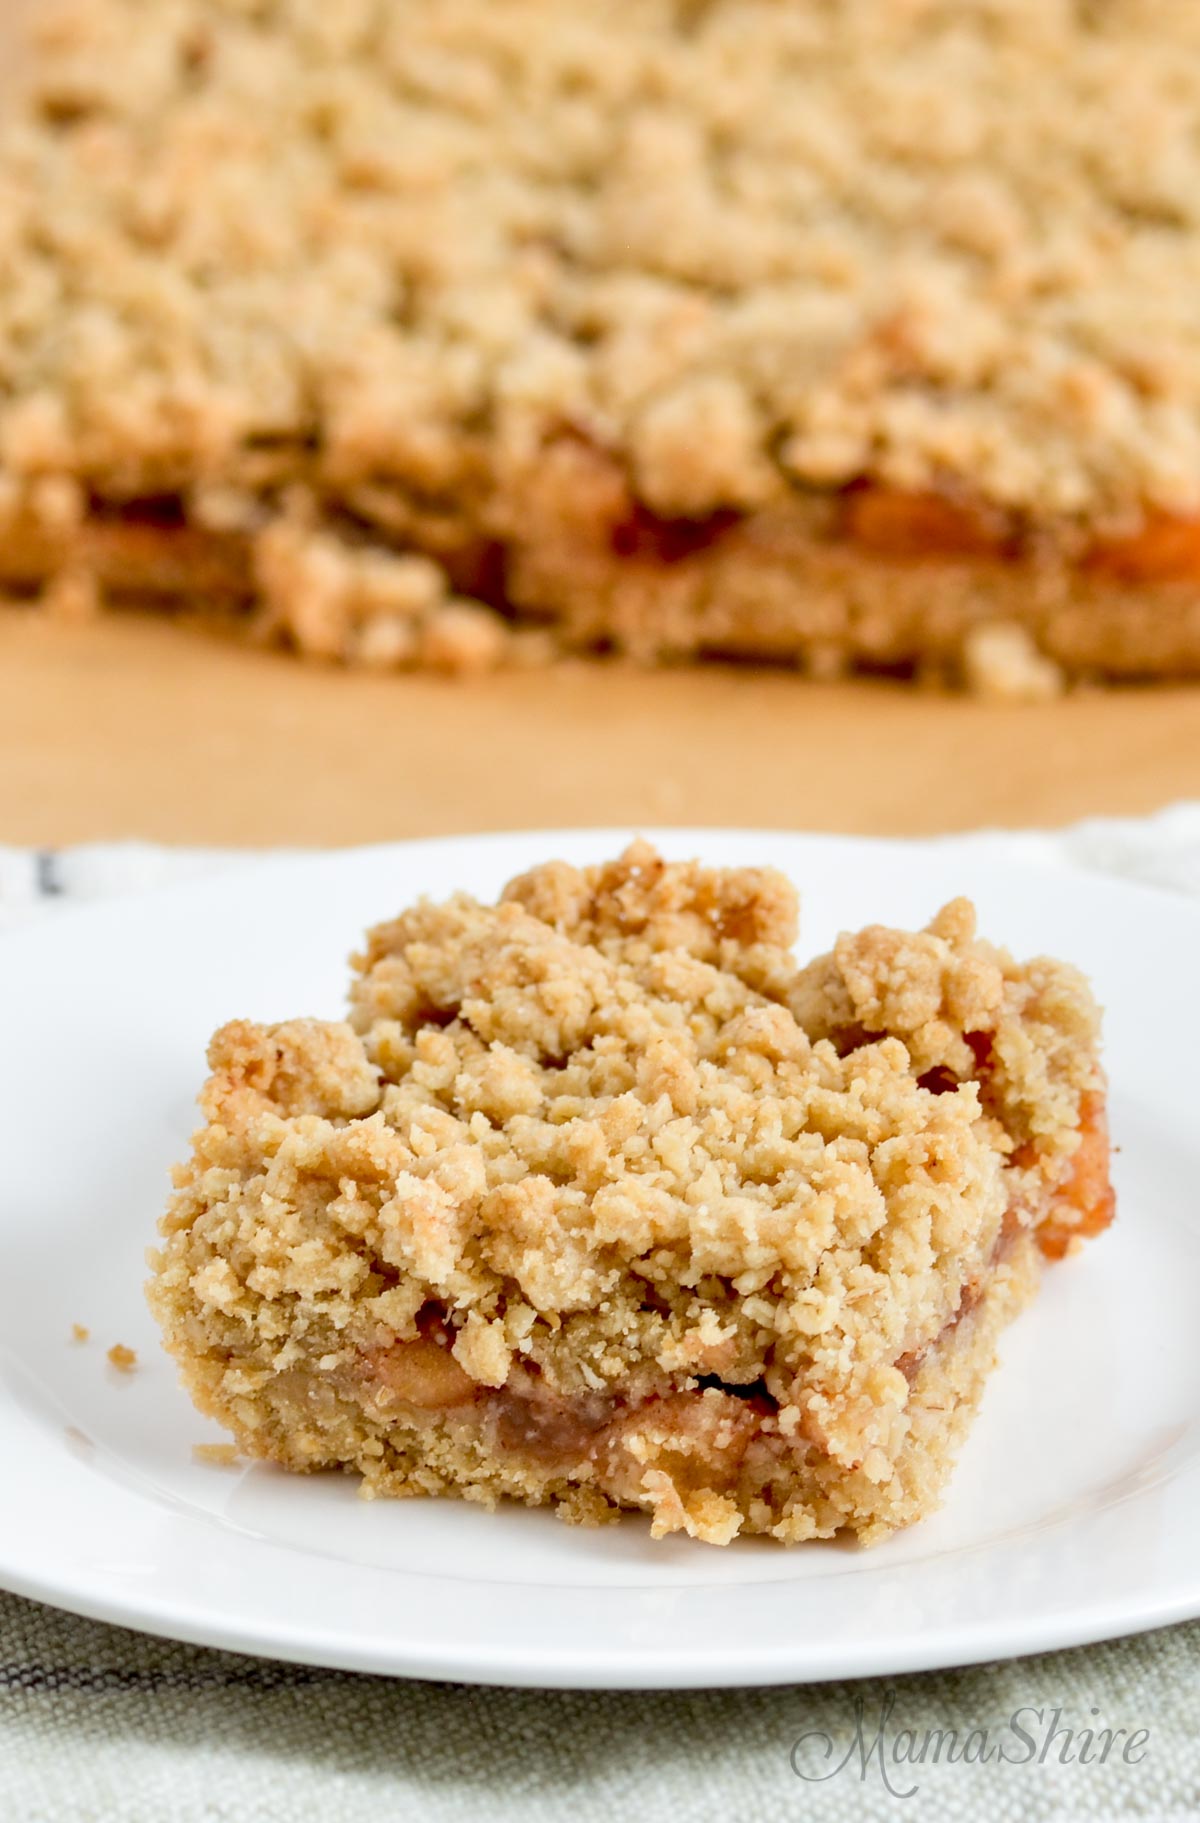 Gluten-free apple cinnamon oatmeal bar with more in the background.